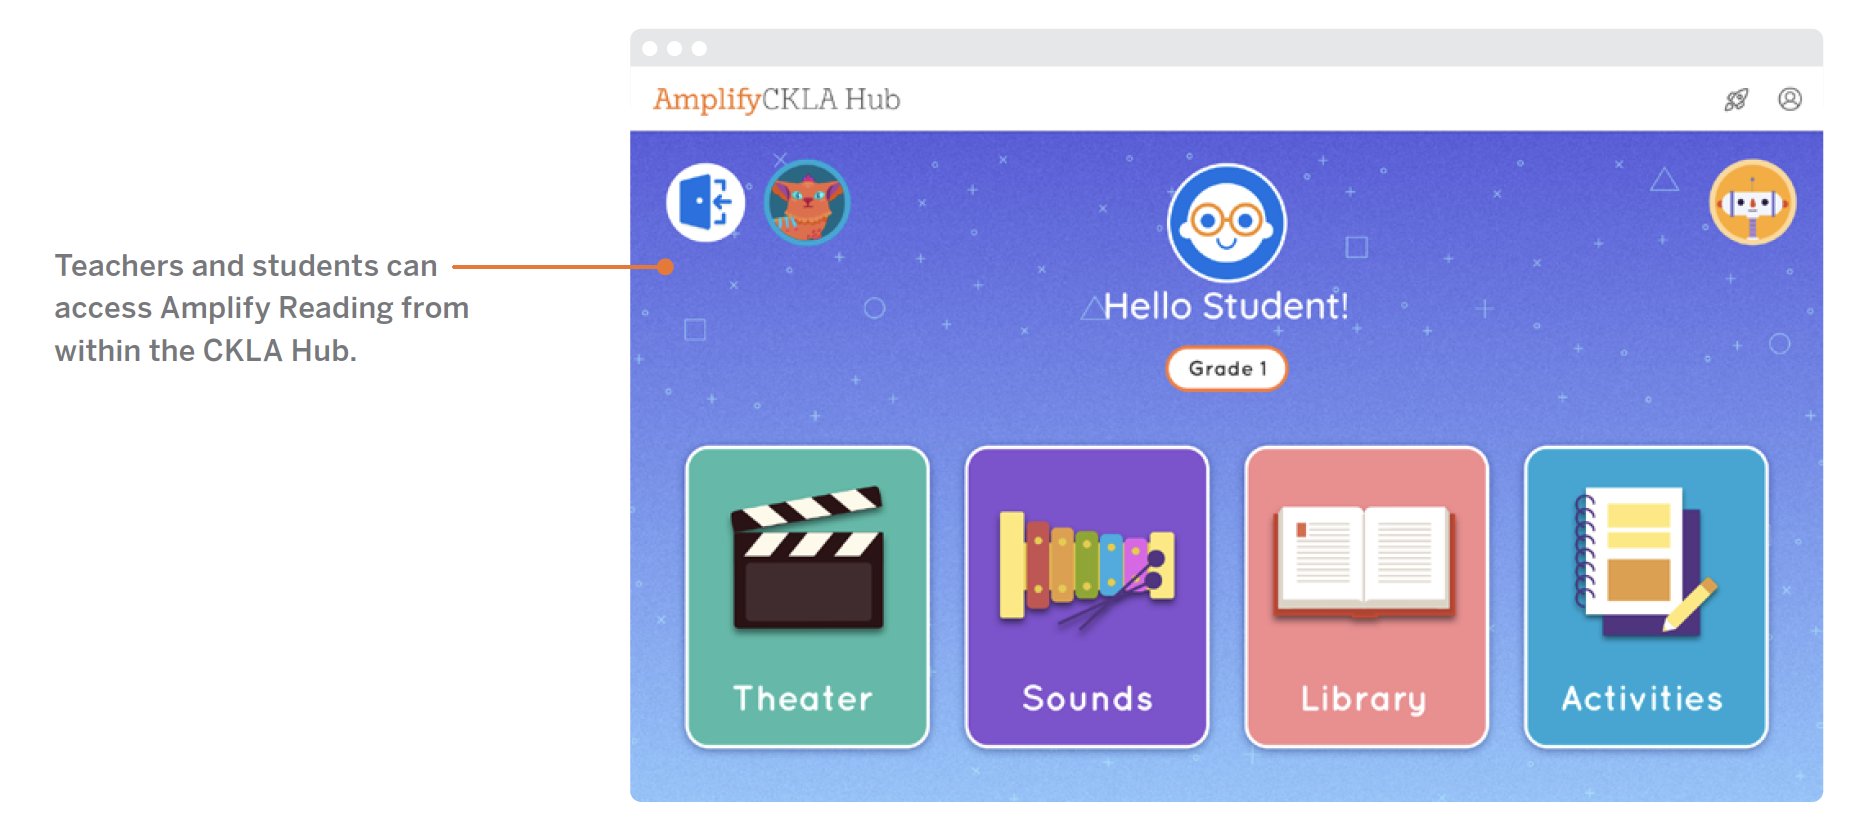 Educational website interface showing icons for theater, sounds, library, and activities with a greeting 